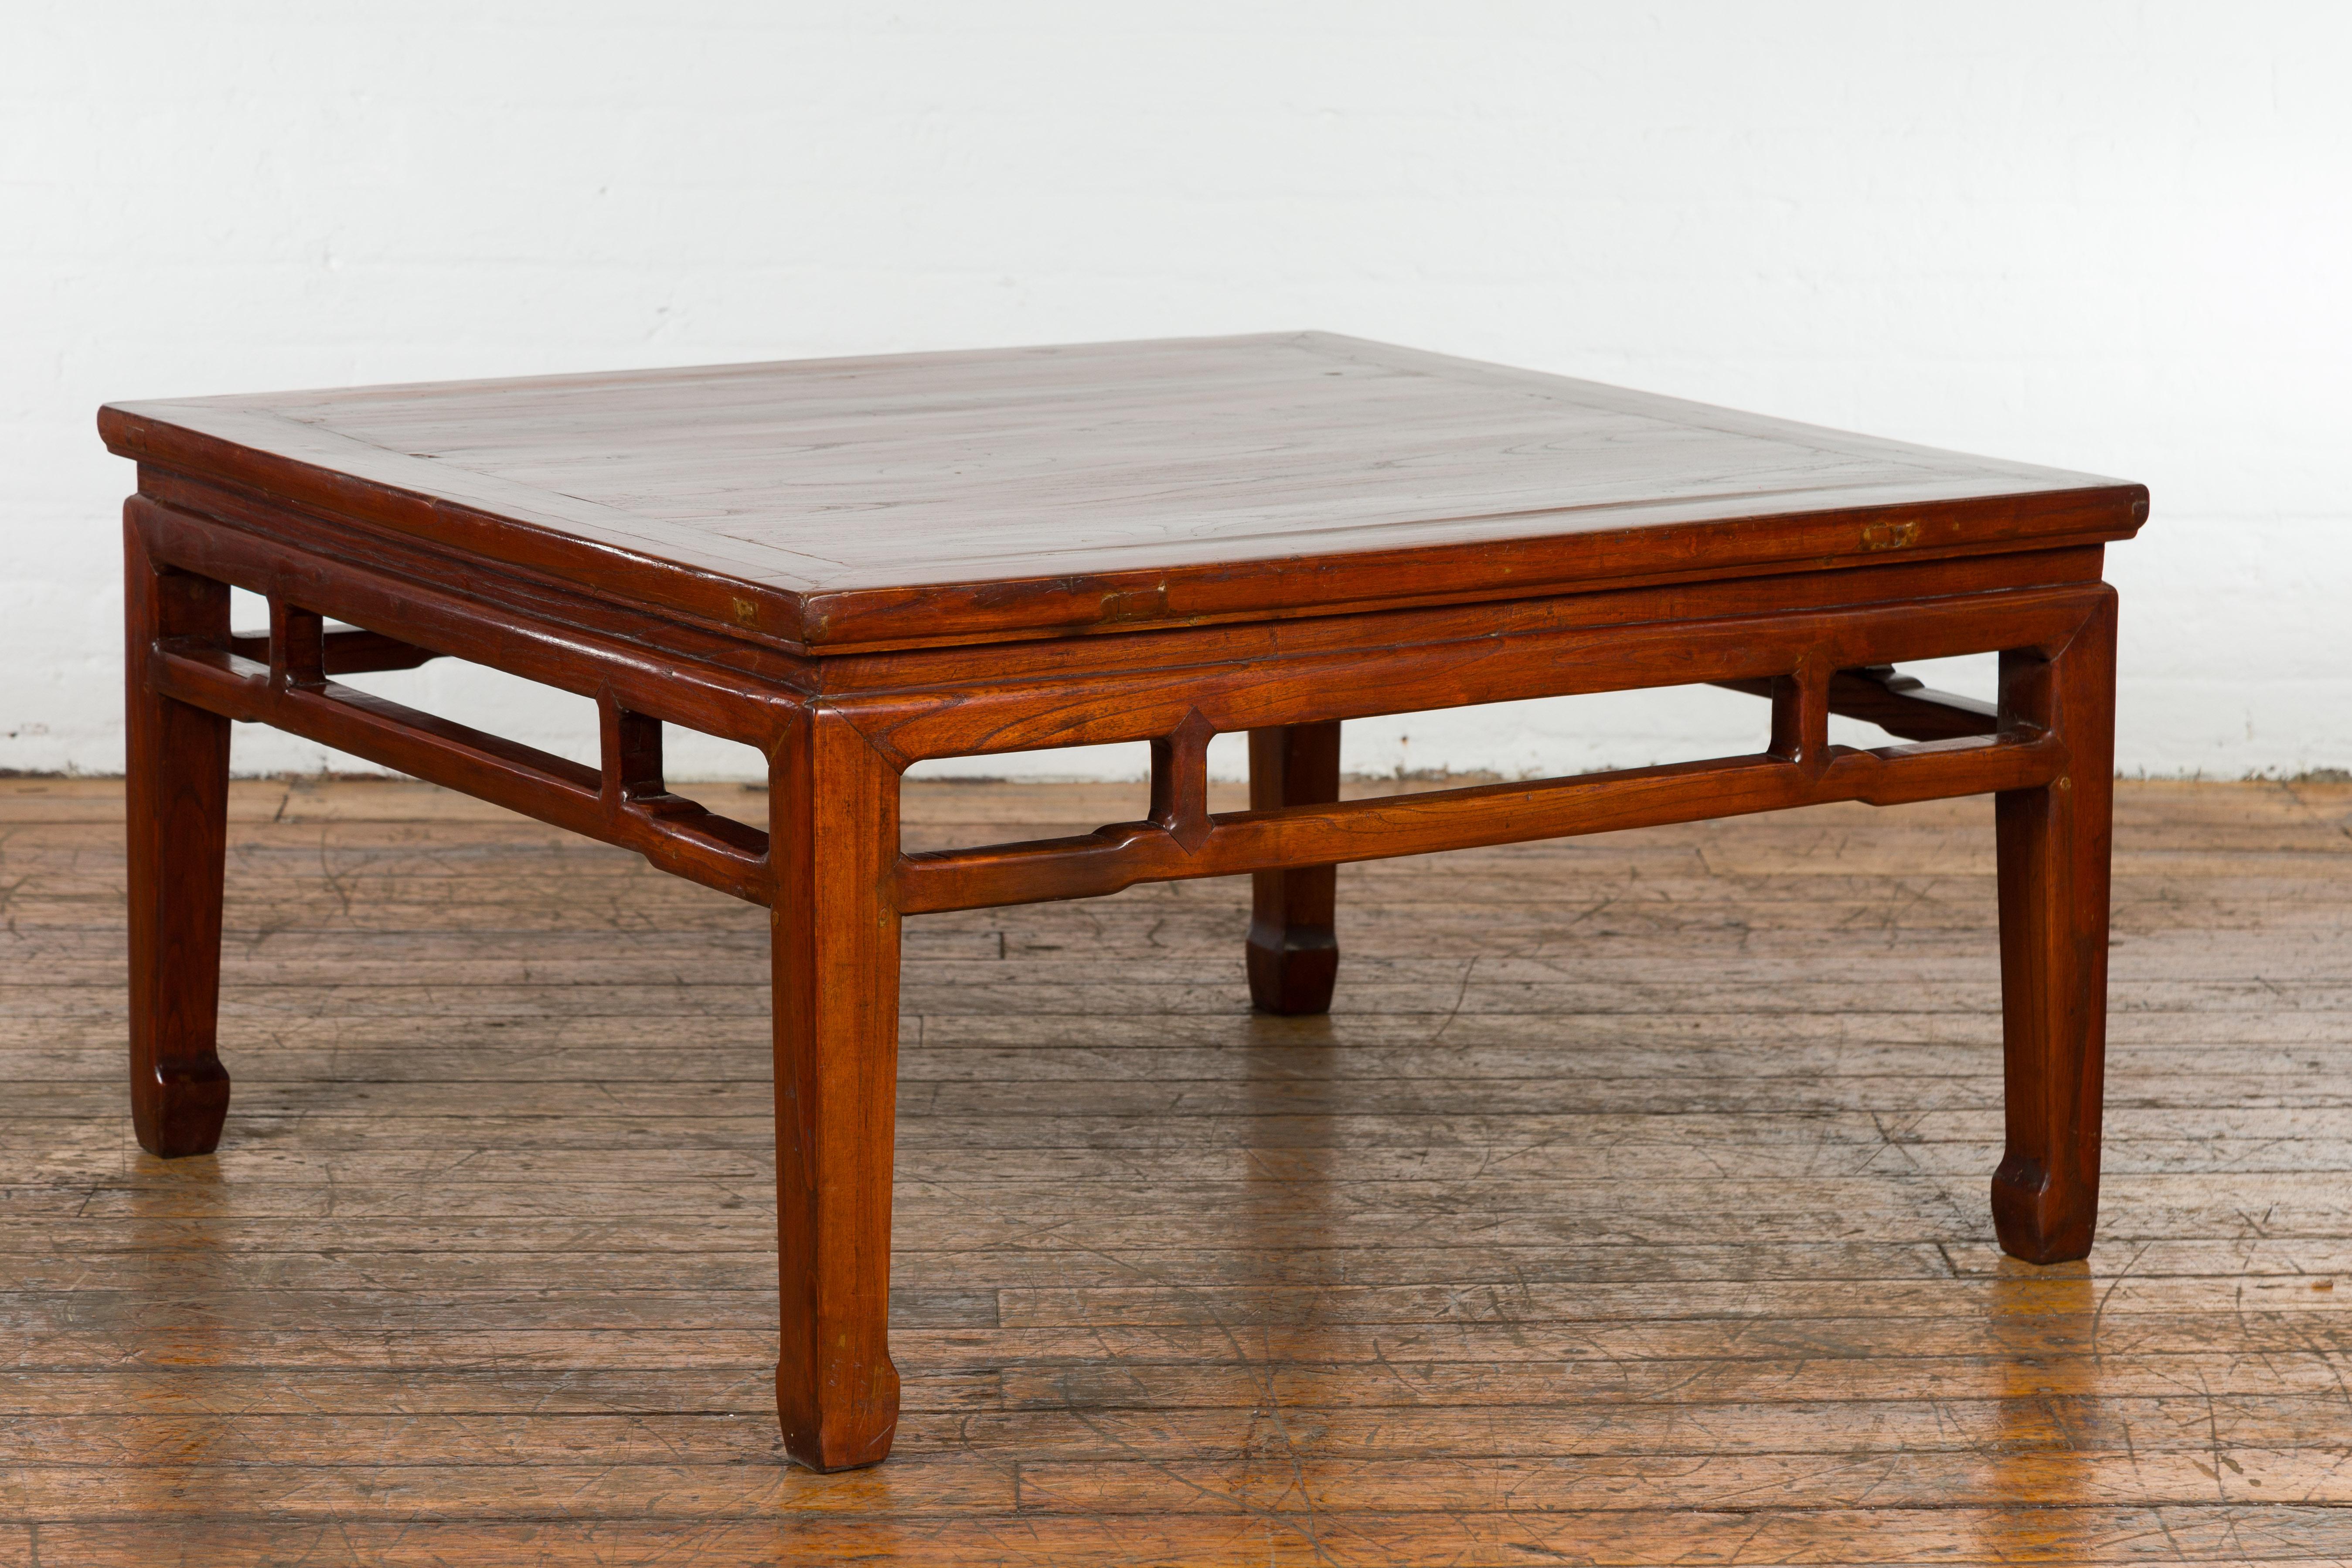 Wood Rich Brown Square Shaped Coffee Table with Spacious Top For Sale